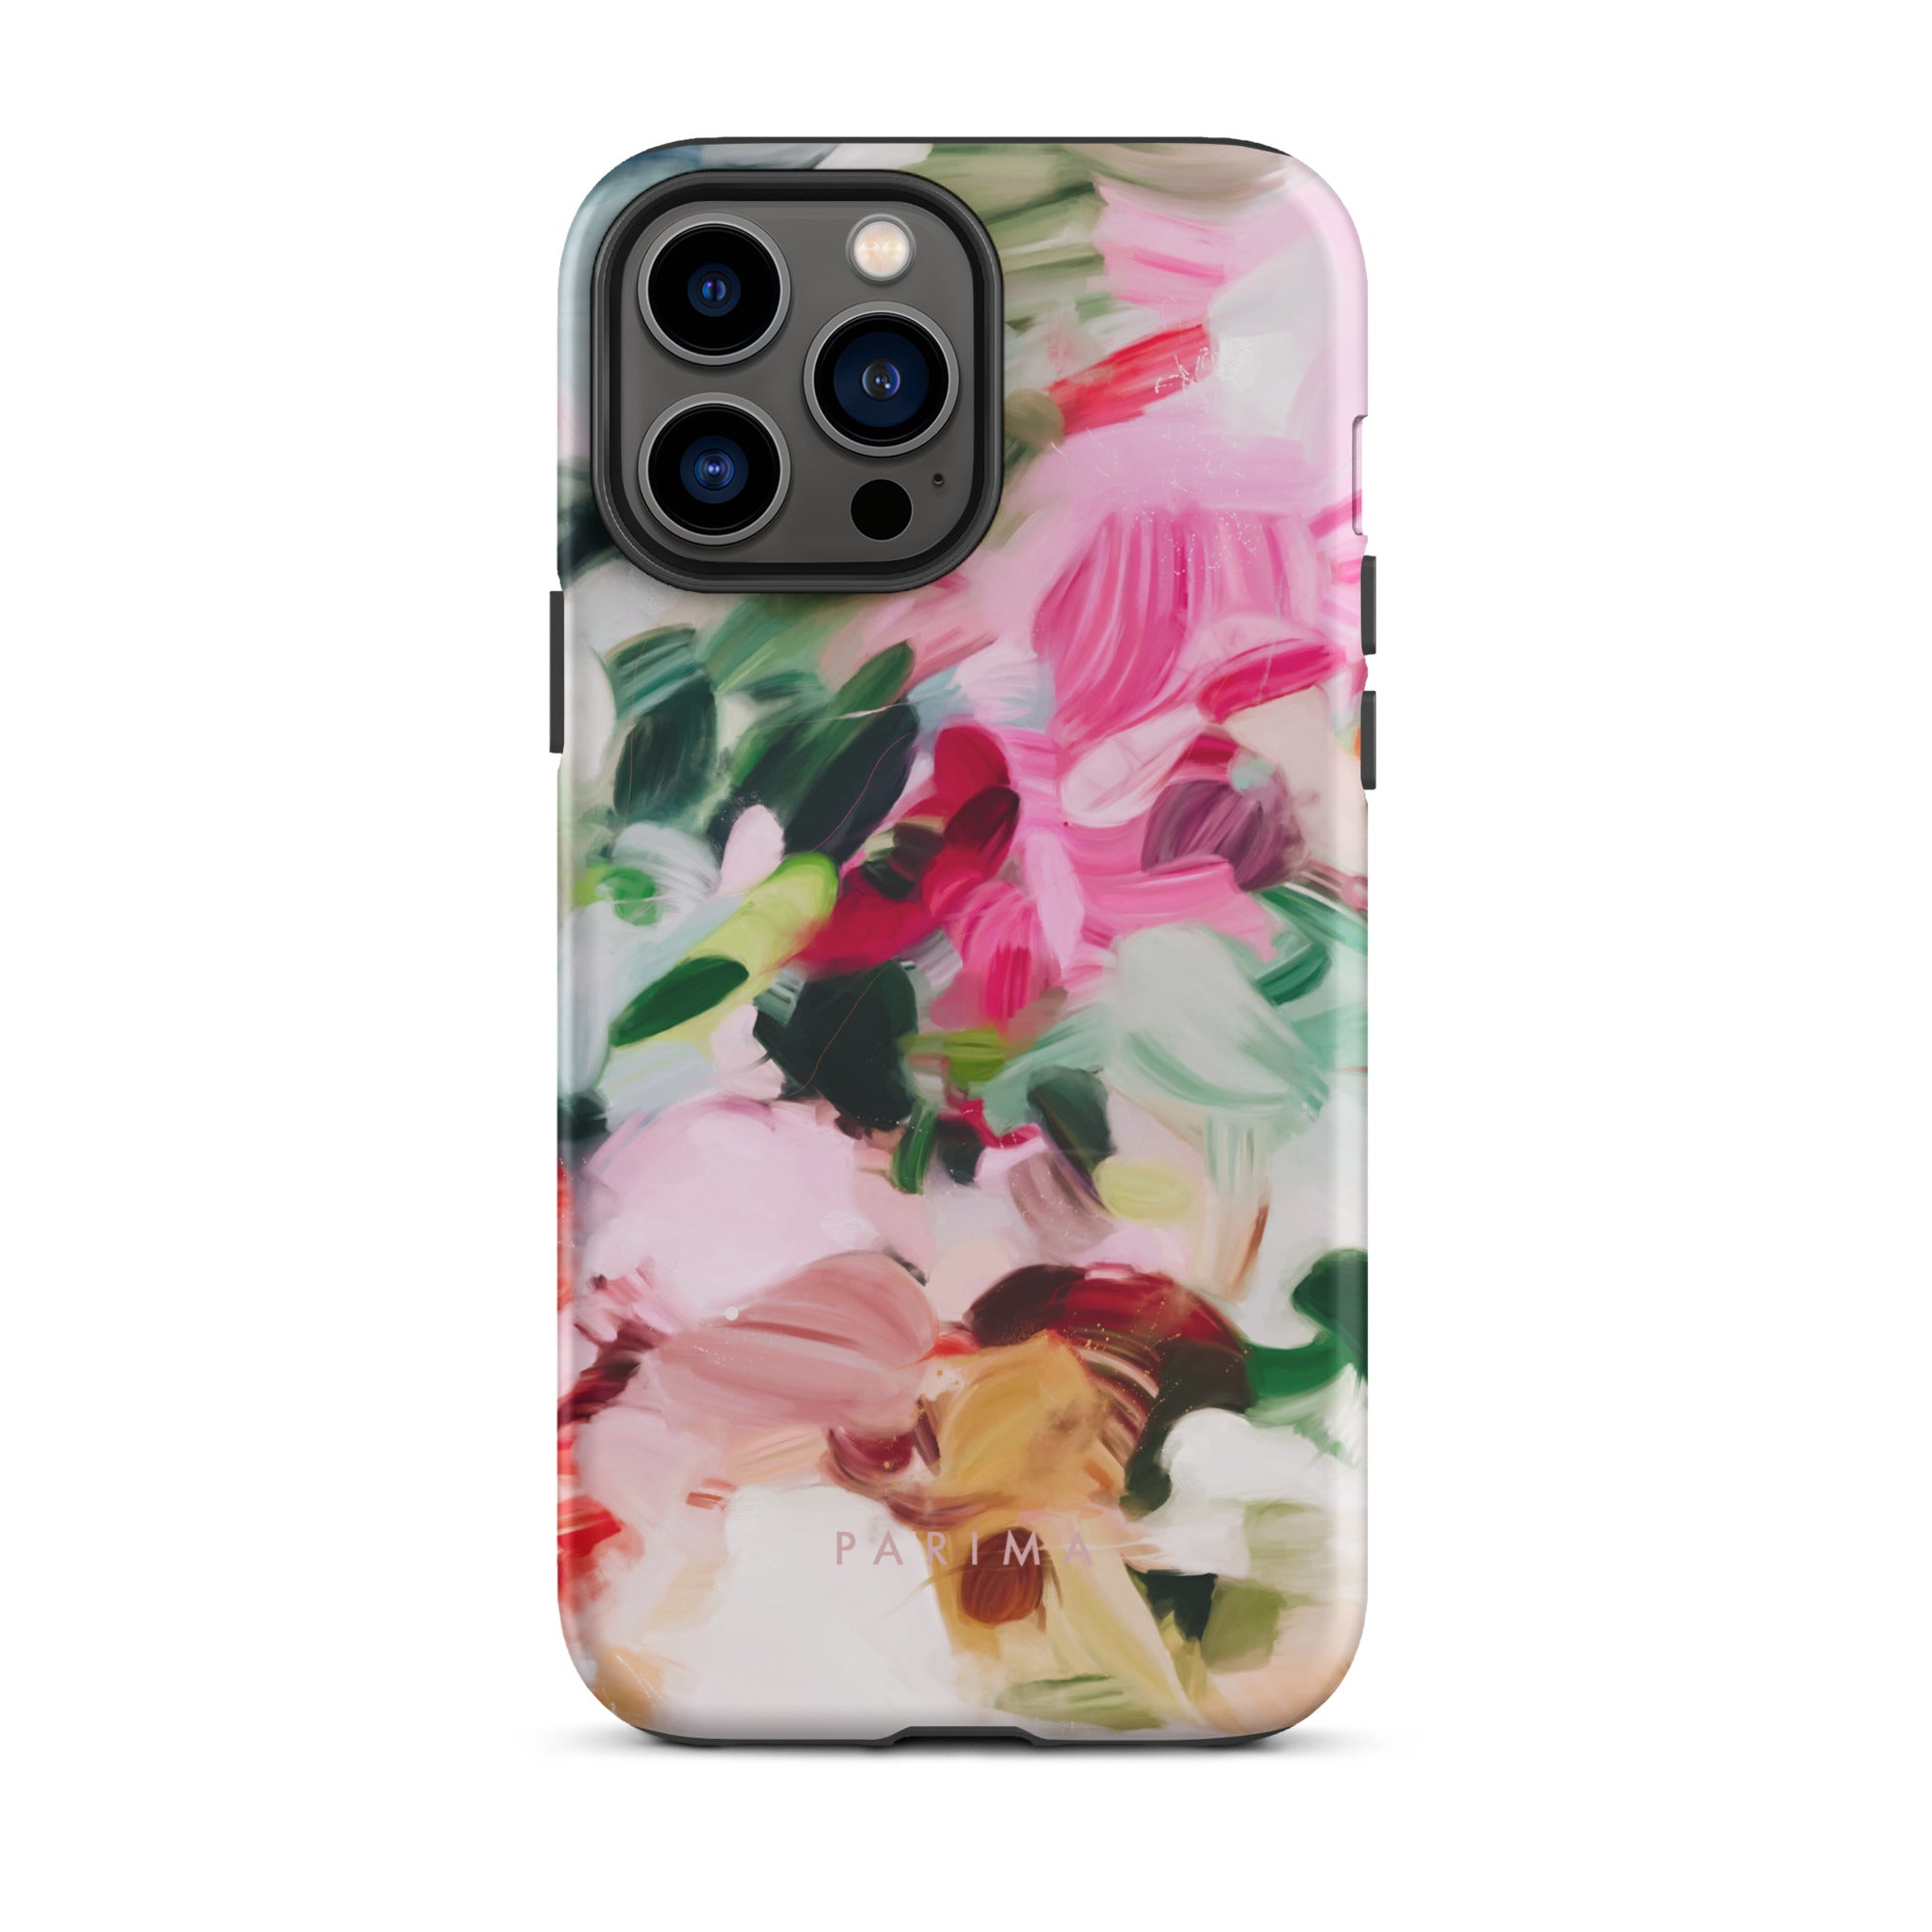 Bloom, pink and green abstract art - iPhone 13 Pro Max tough case by Parima Studio